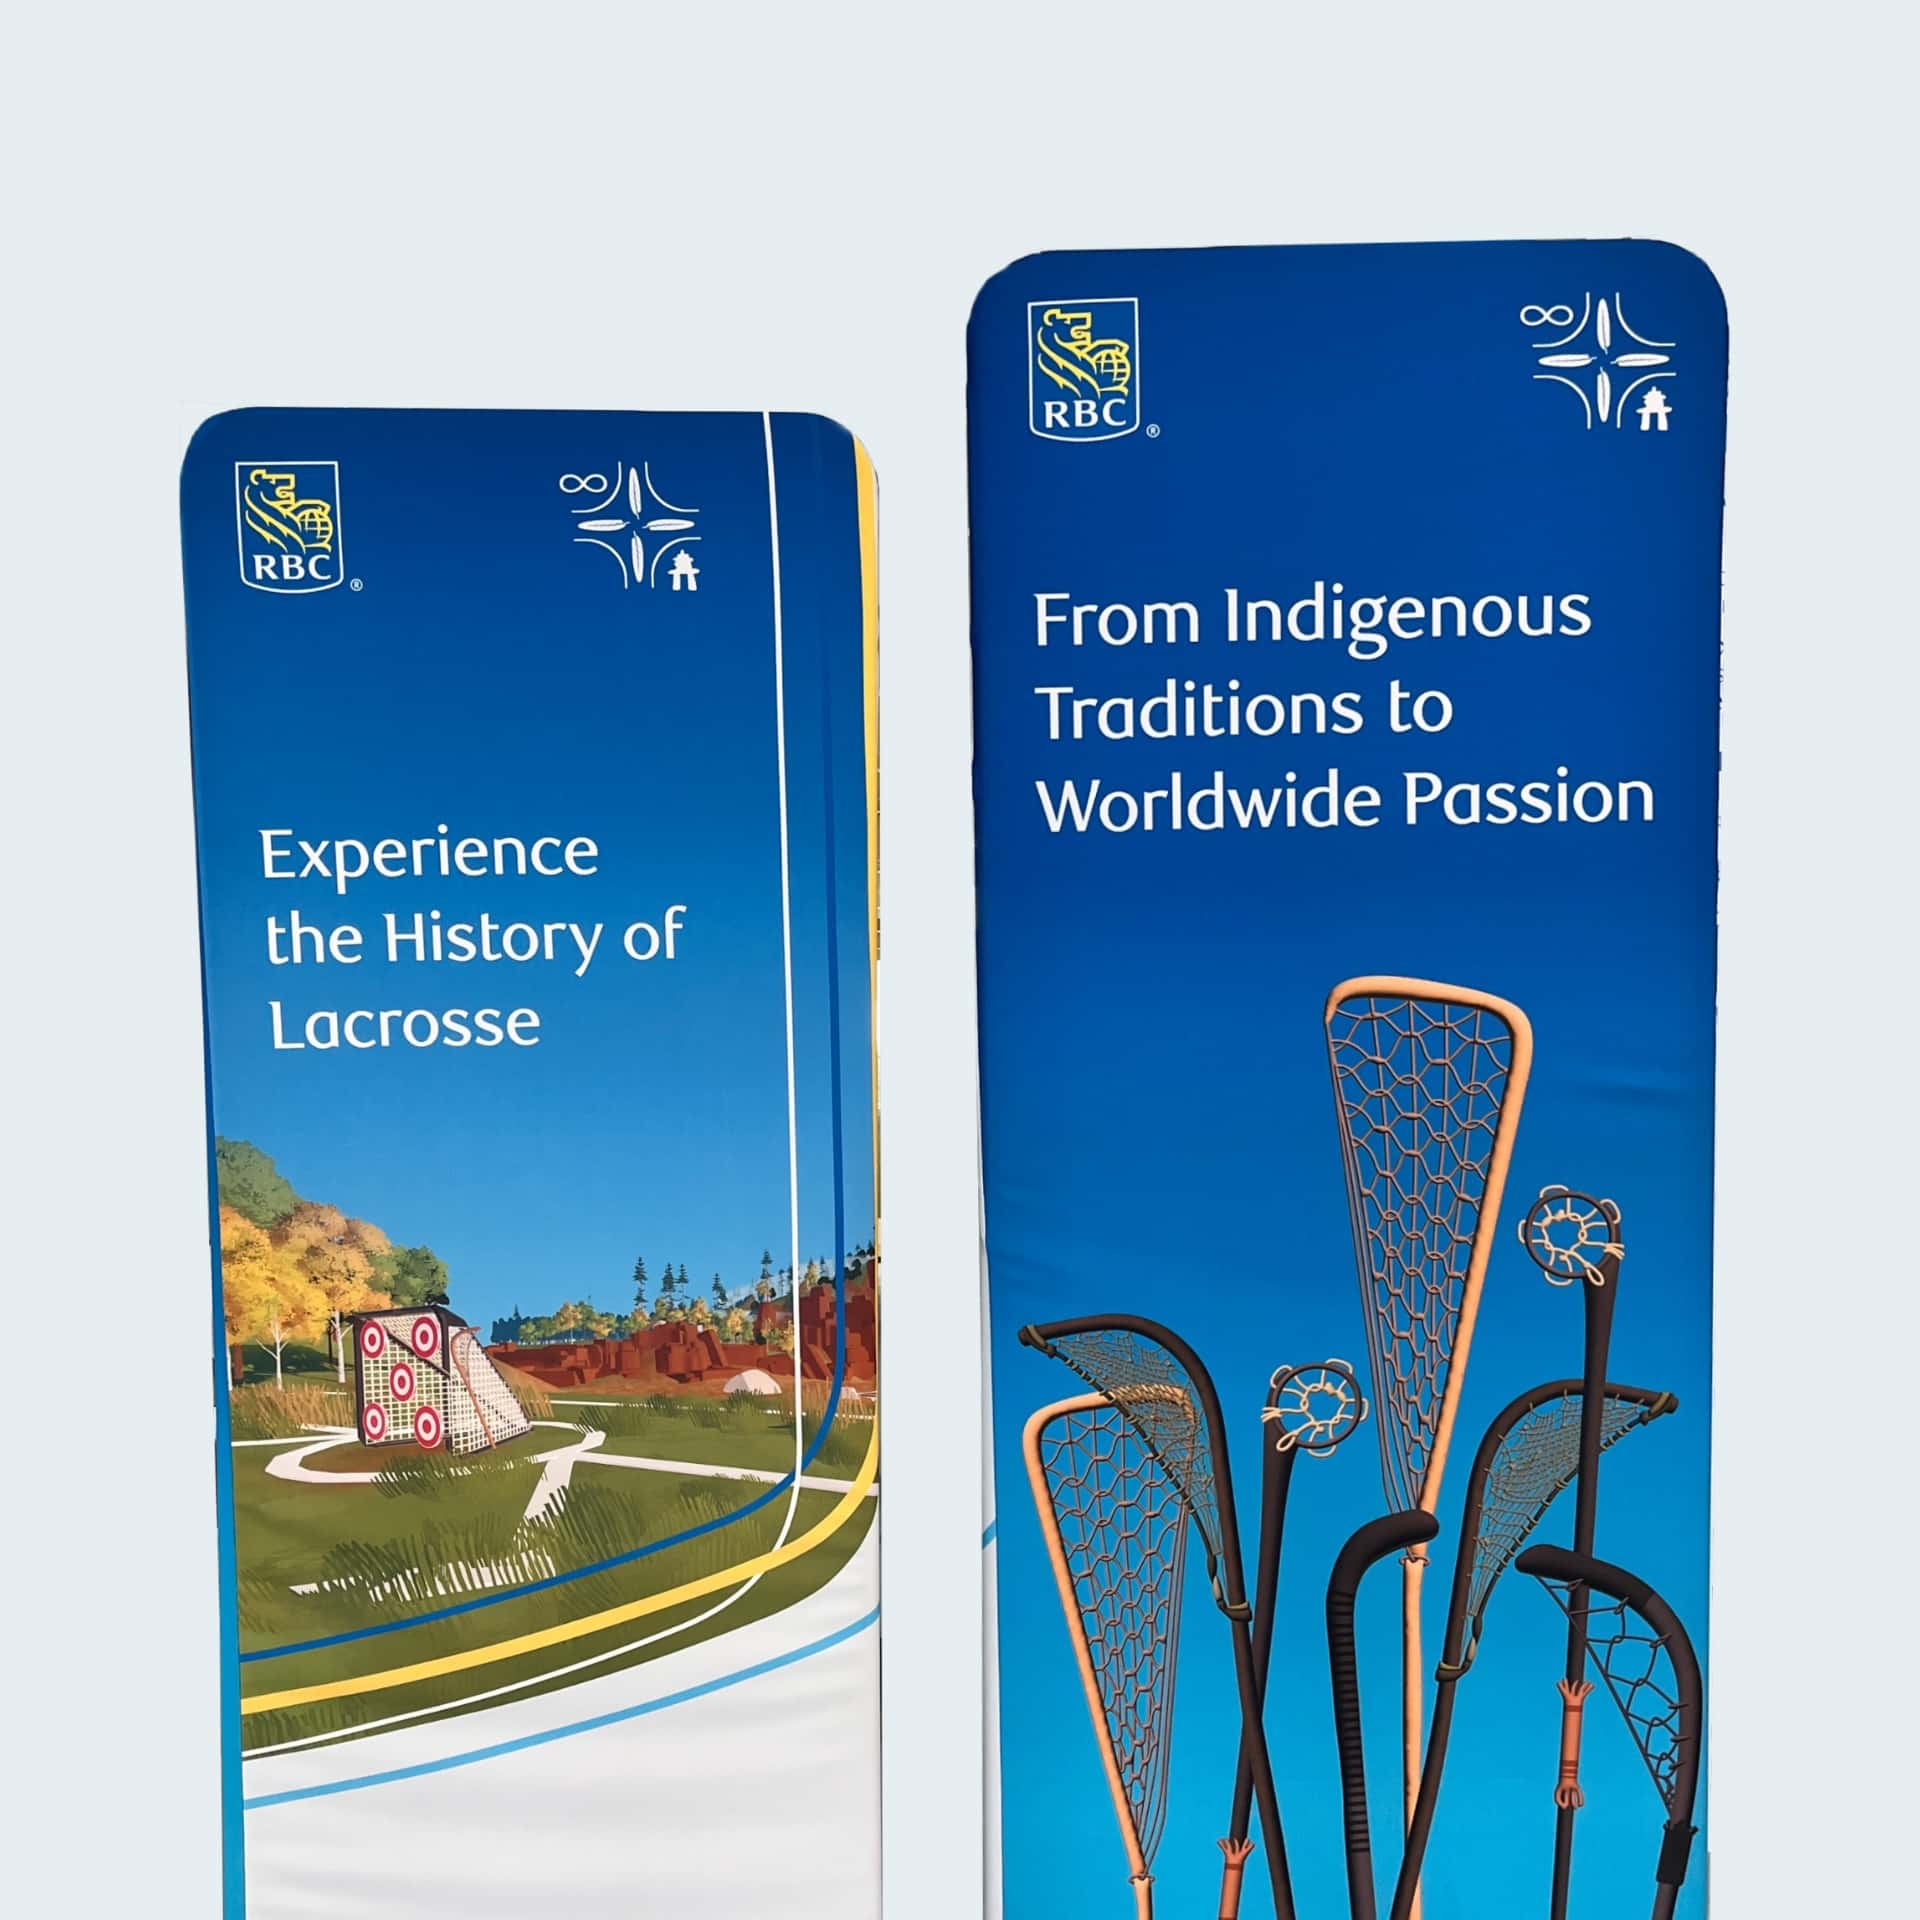 iPhone mockups of the VR experience. One says 'Experience the History of Lacrosse' and the other displays the text, 'From Indigenous Traditions to Worldwide Passion'.